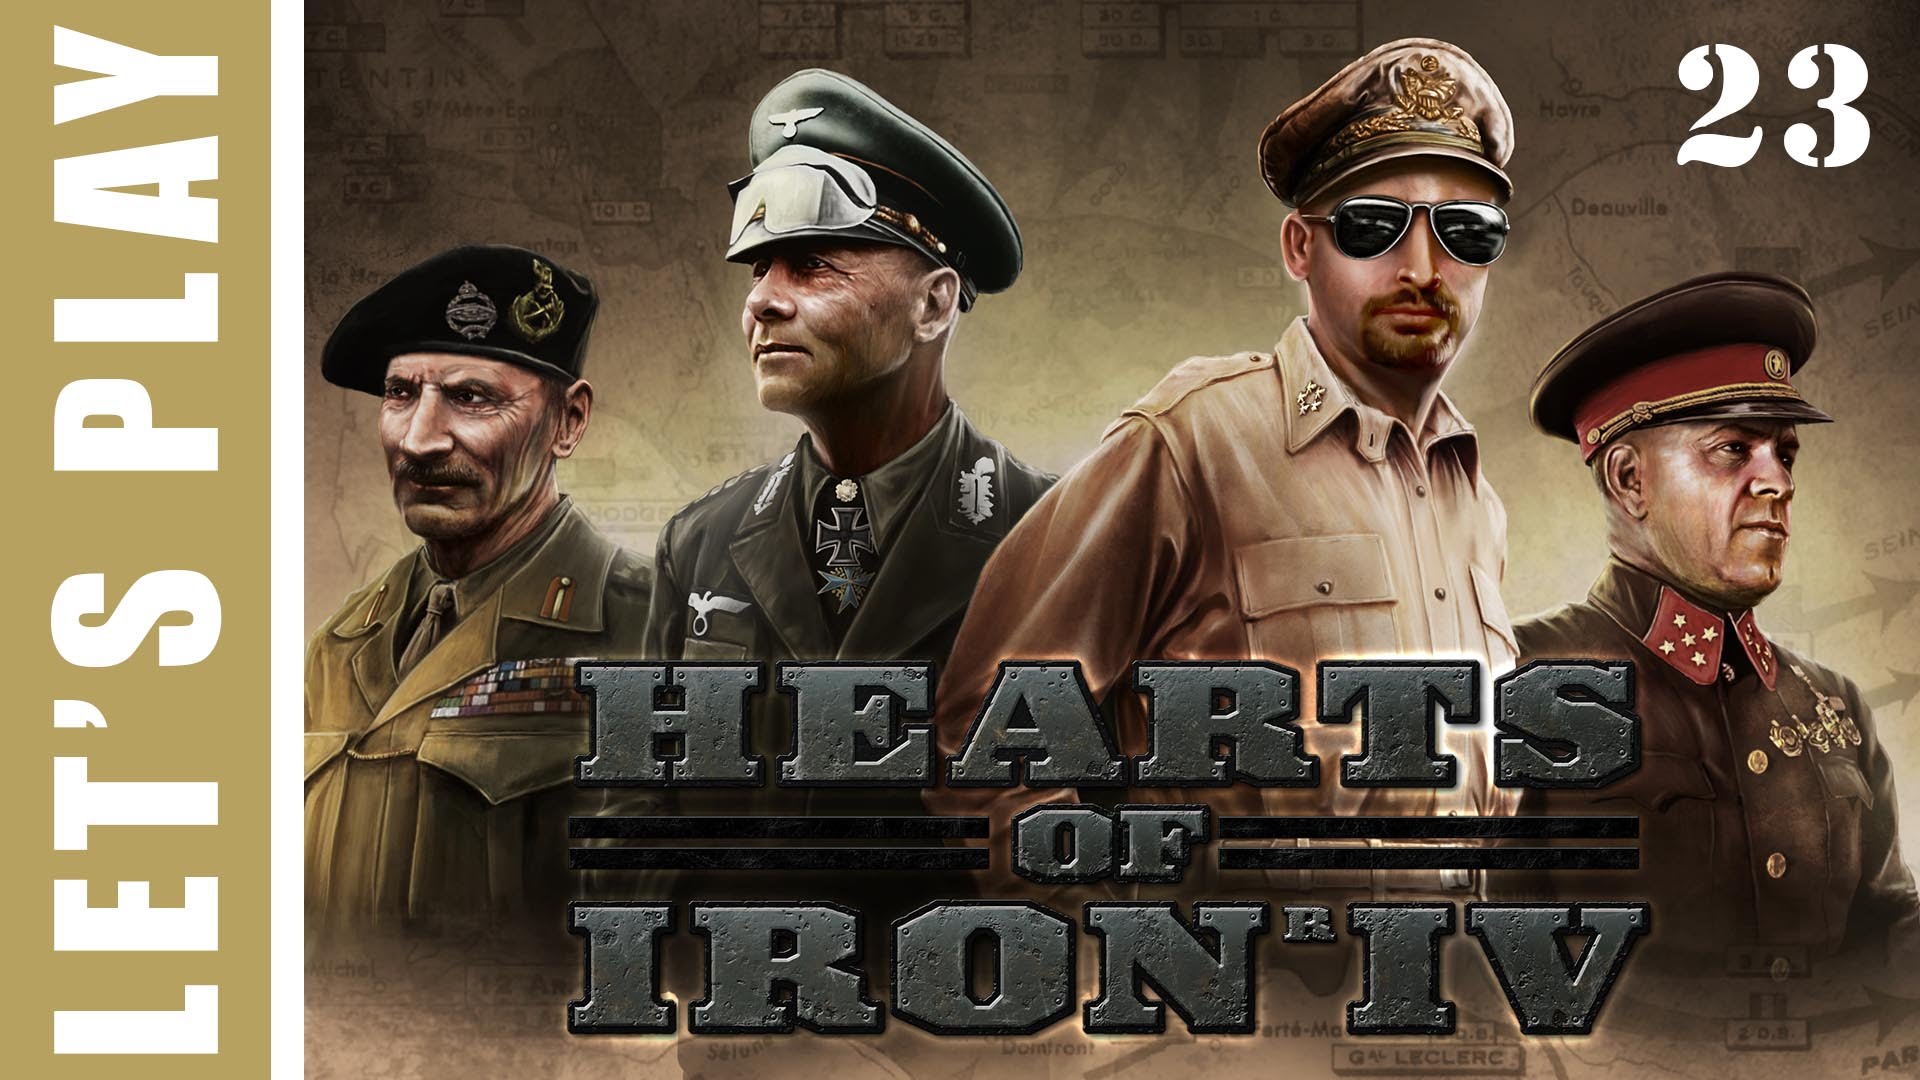 Hearts of Iron IV Germany Wins World War 2 Let’s Play 23